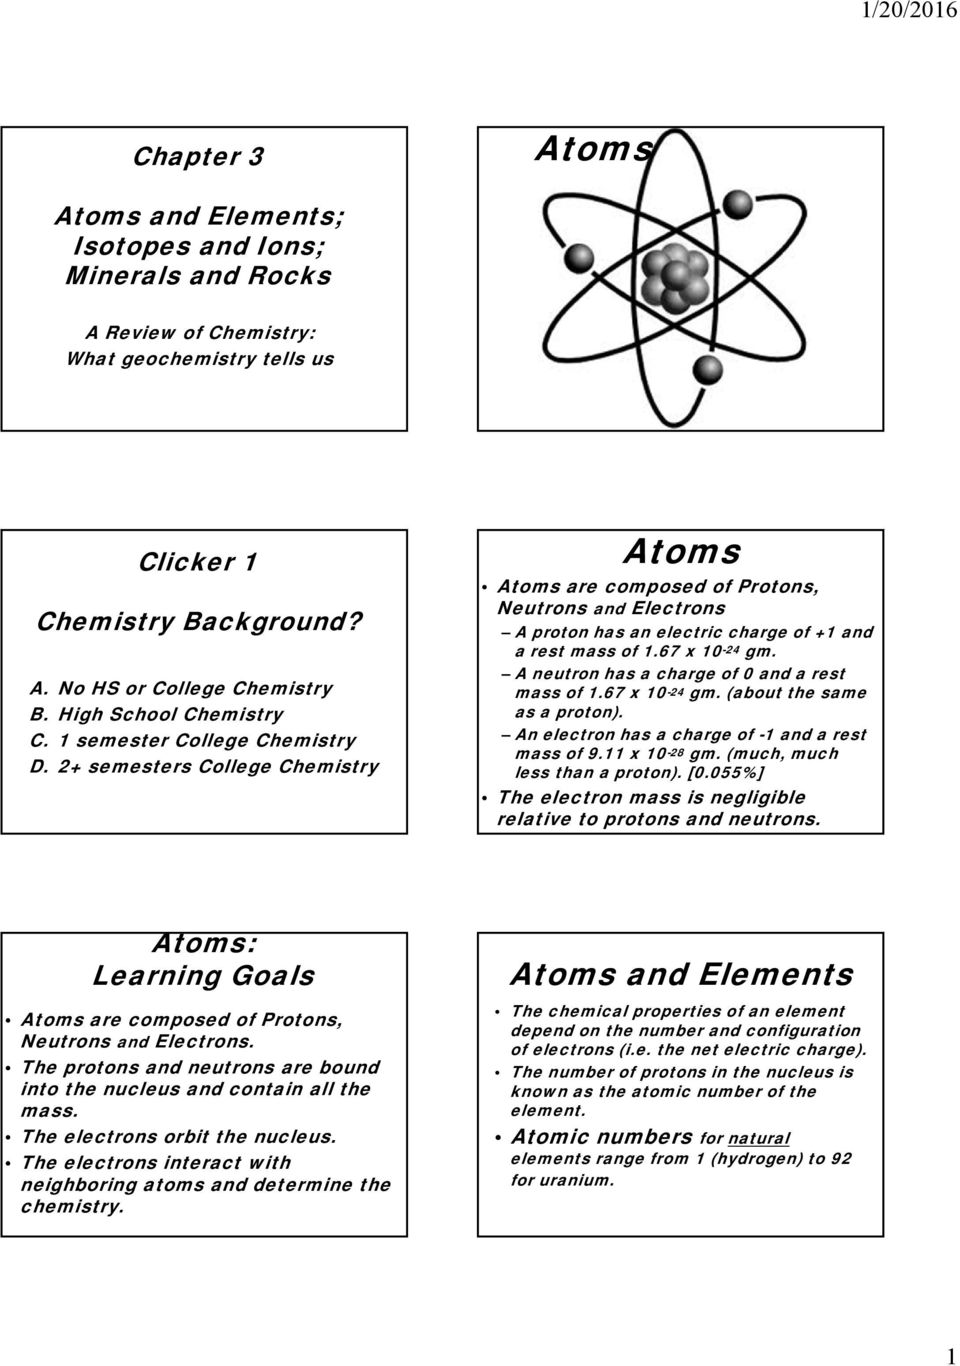 2+ semesters College Chemistry Atoms Atoms are composed of Protons, Neutrons and Electrons A proton has an electric charge of +1 and a rest mass of 1.67 x 10-24 gm.